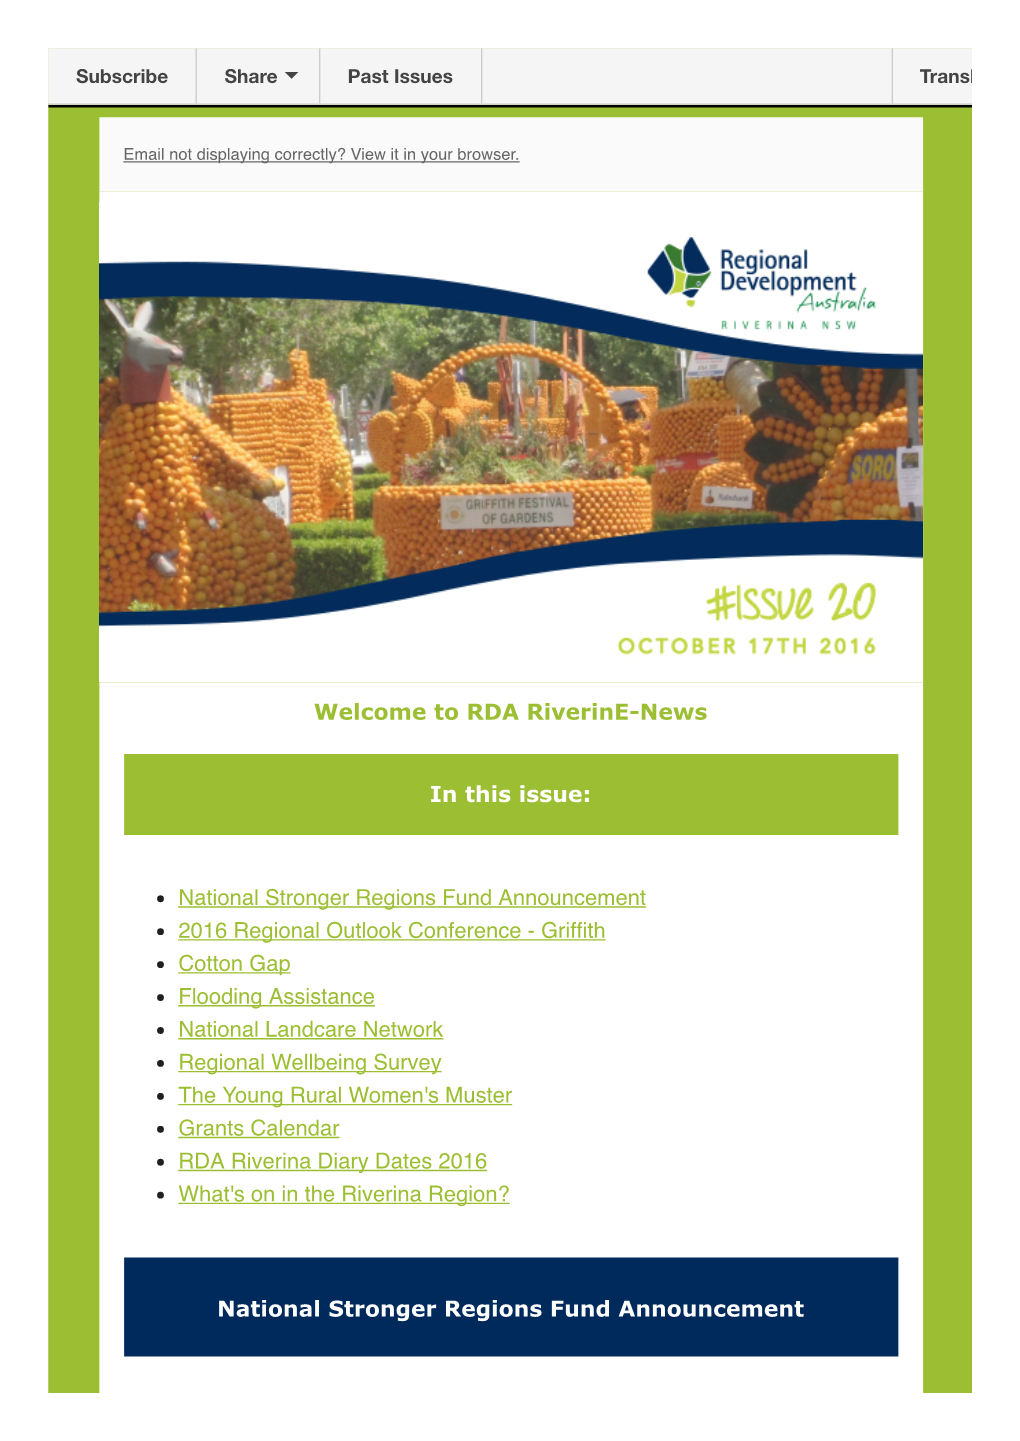 Welcome to RDA Riverinenews in This Issue: National Stronger Regions Fund Announcement 2016 Regional Outlook Conference